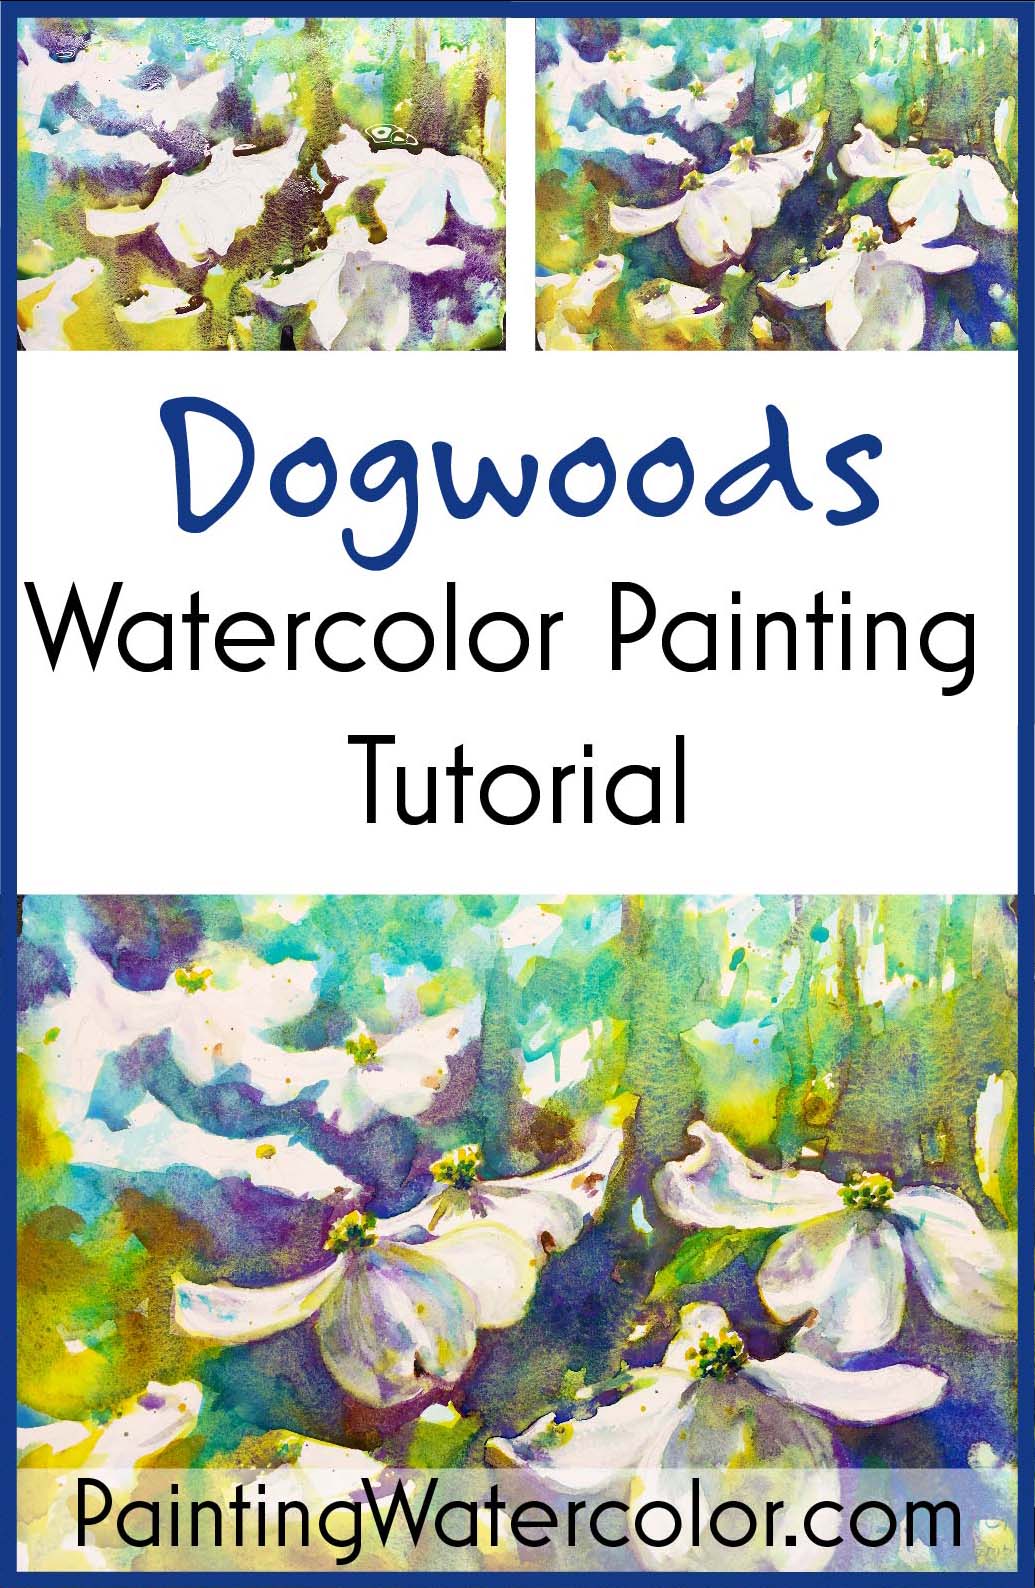 Dogwoods watercolor painting tutorial by Jennifer Branch